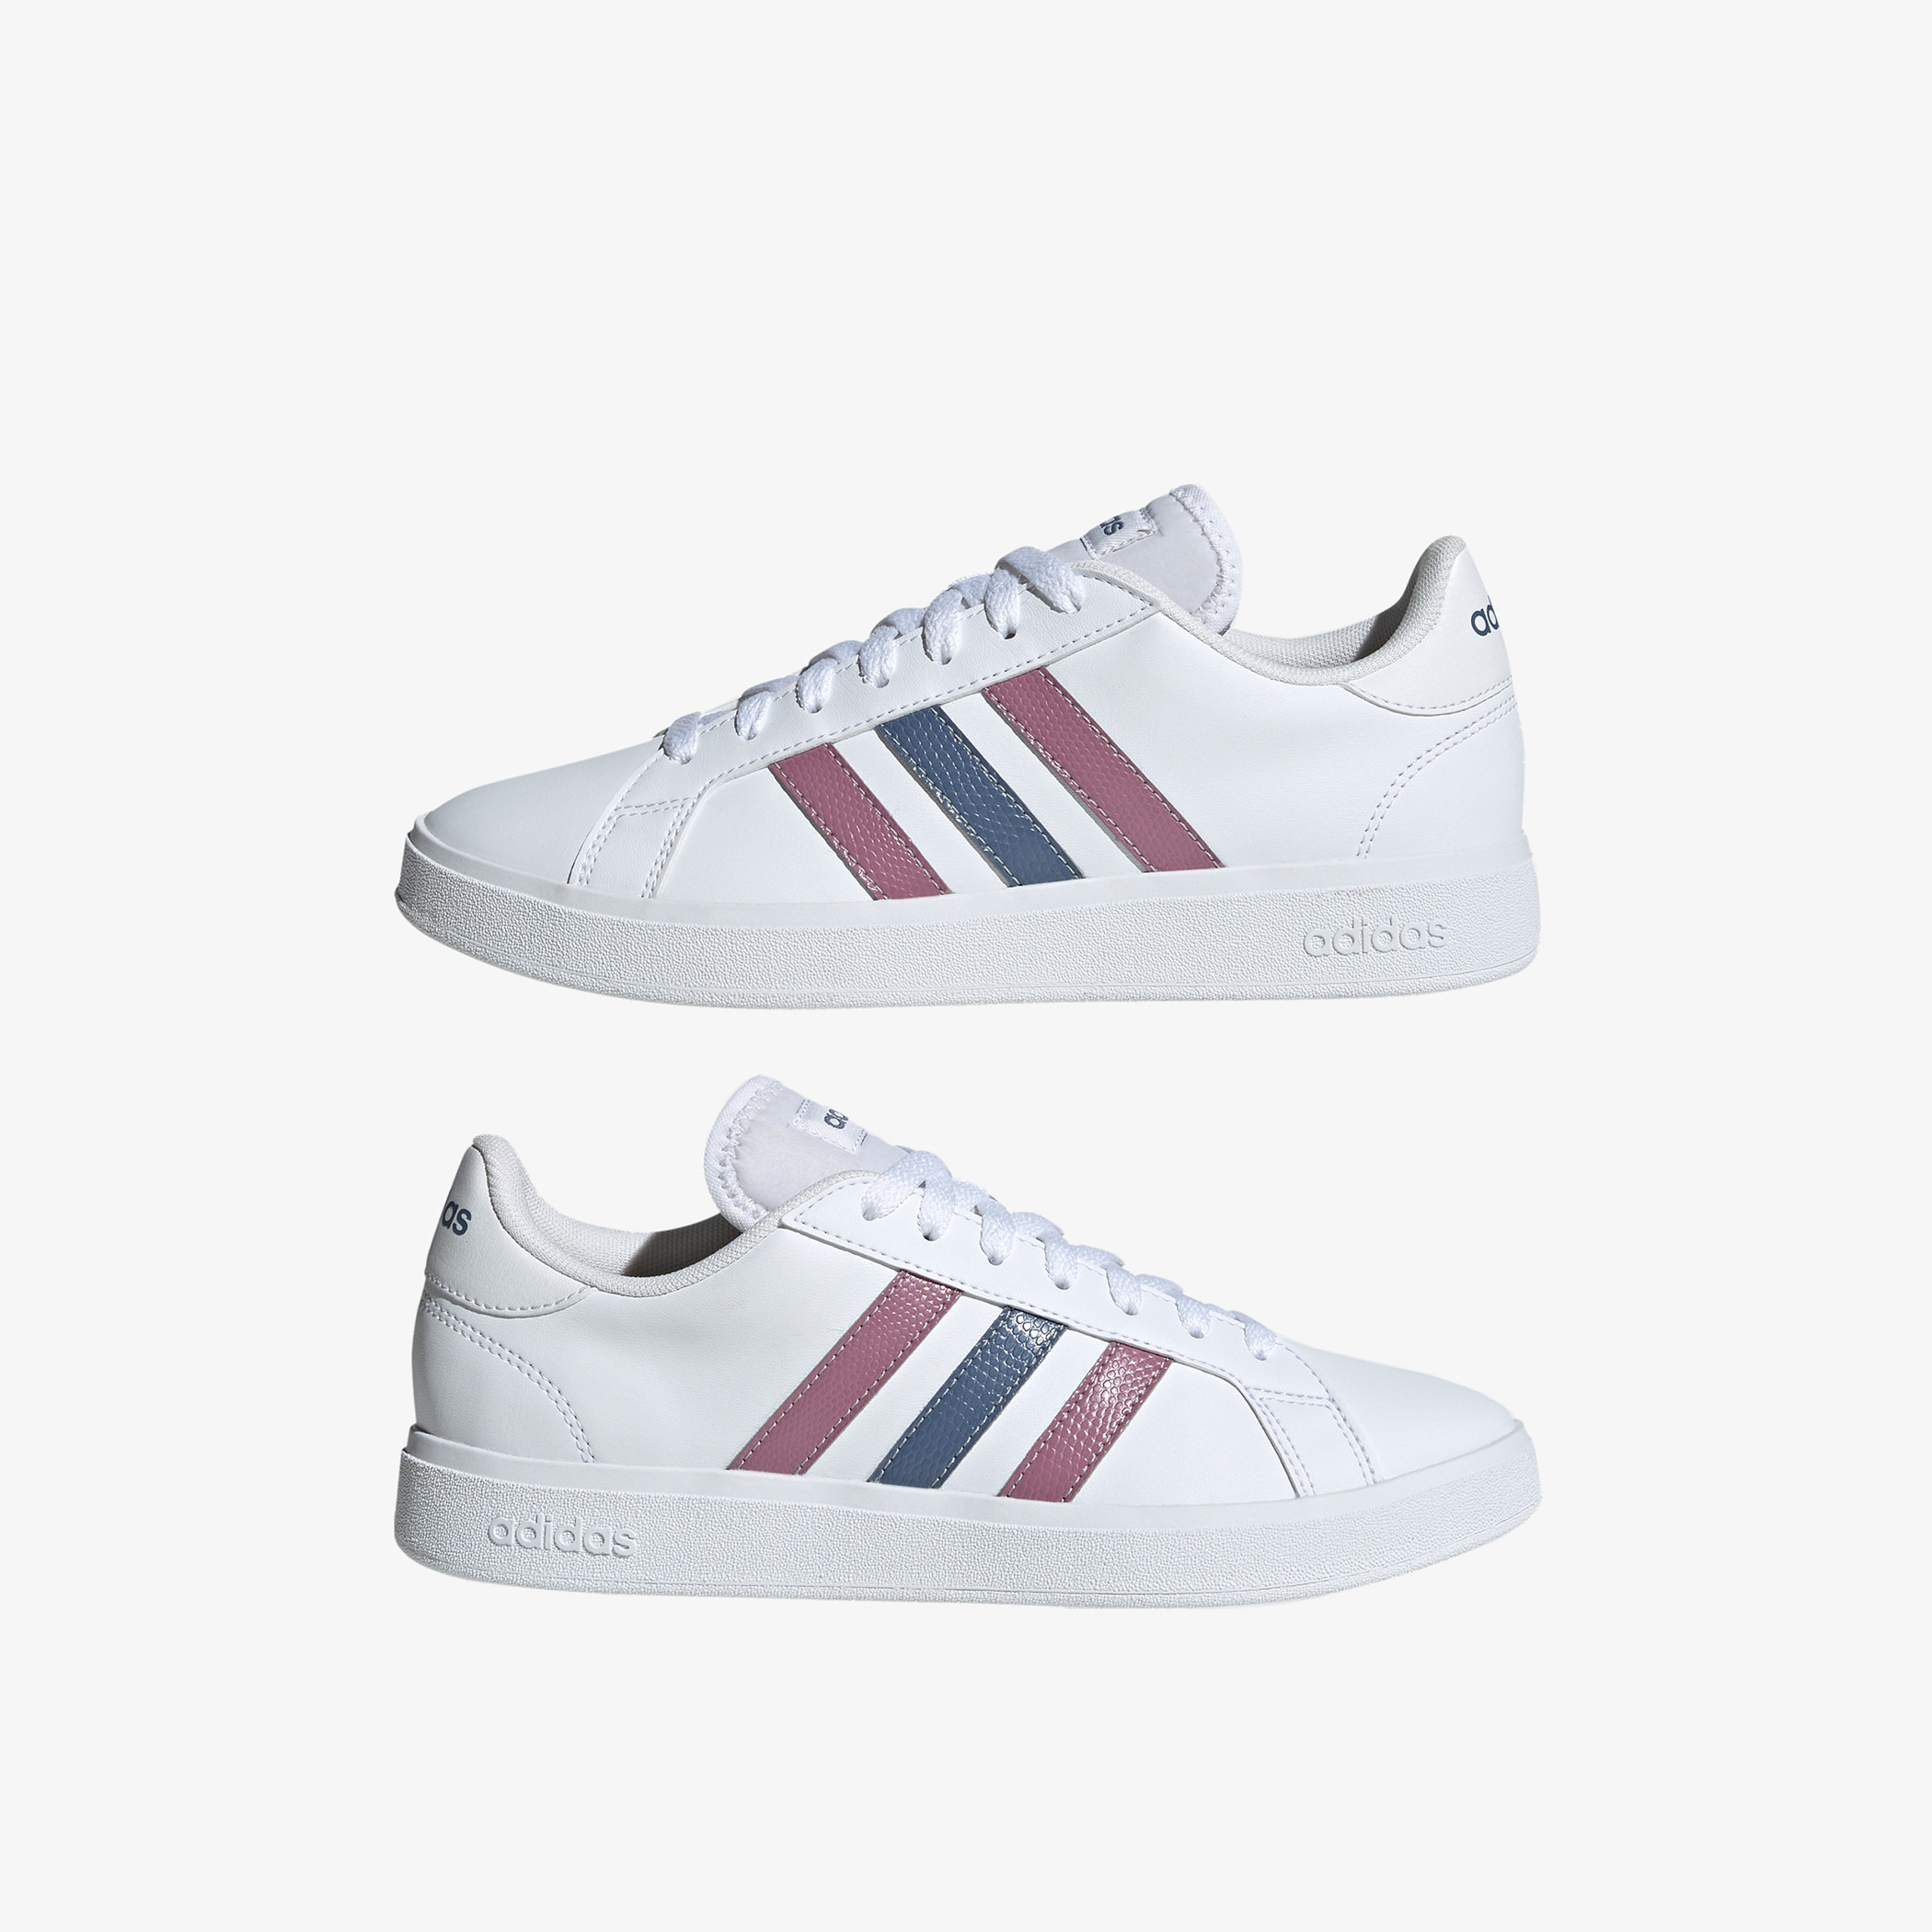 ADIDAS NEO CF QT RACER W Sneakers For Women - Buy MYSRUB/FTWWHT/CBLACK  Color ADIDAS NEO CF QT RACER W Sneakers For Women Online at Best Price -  Shop Online for Footwears in